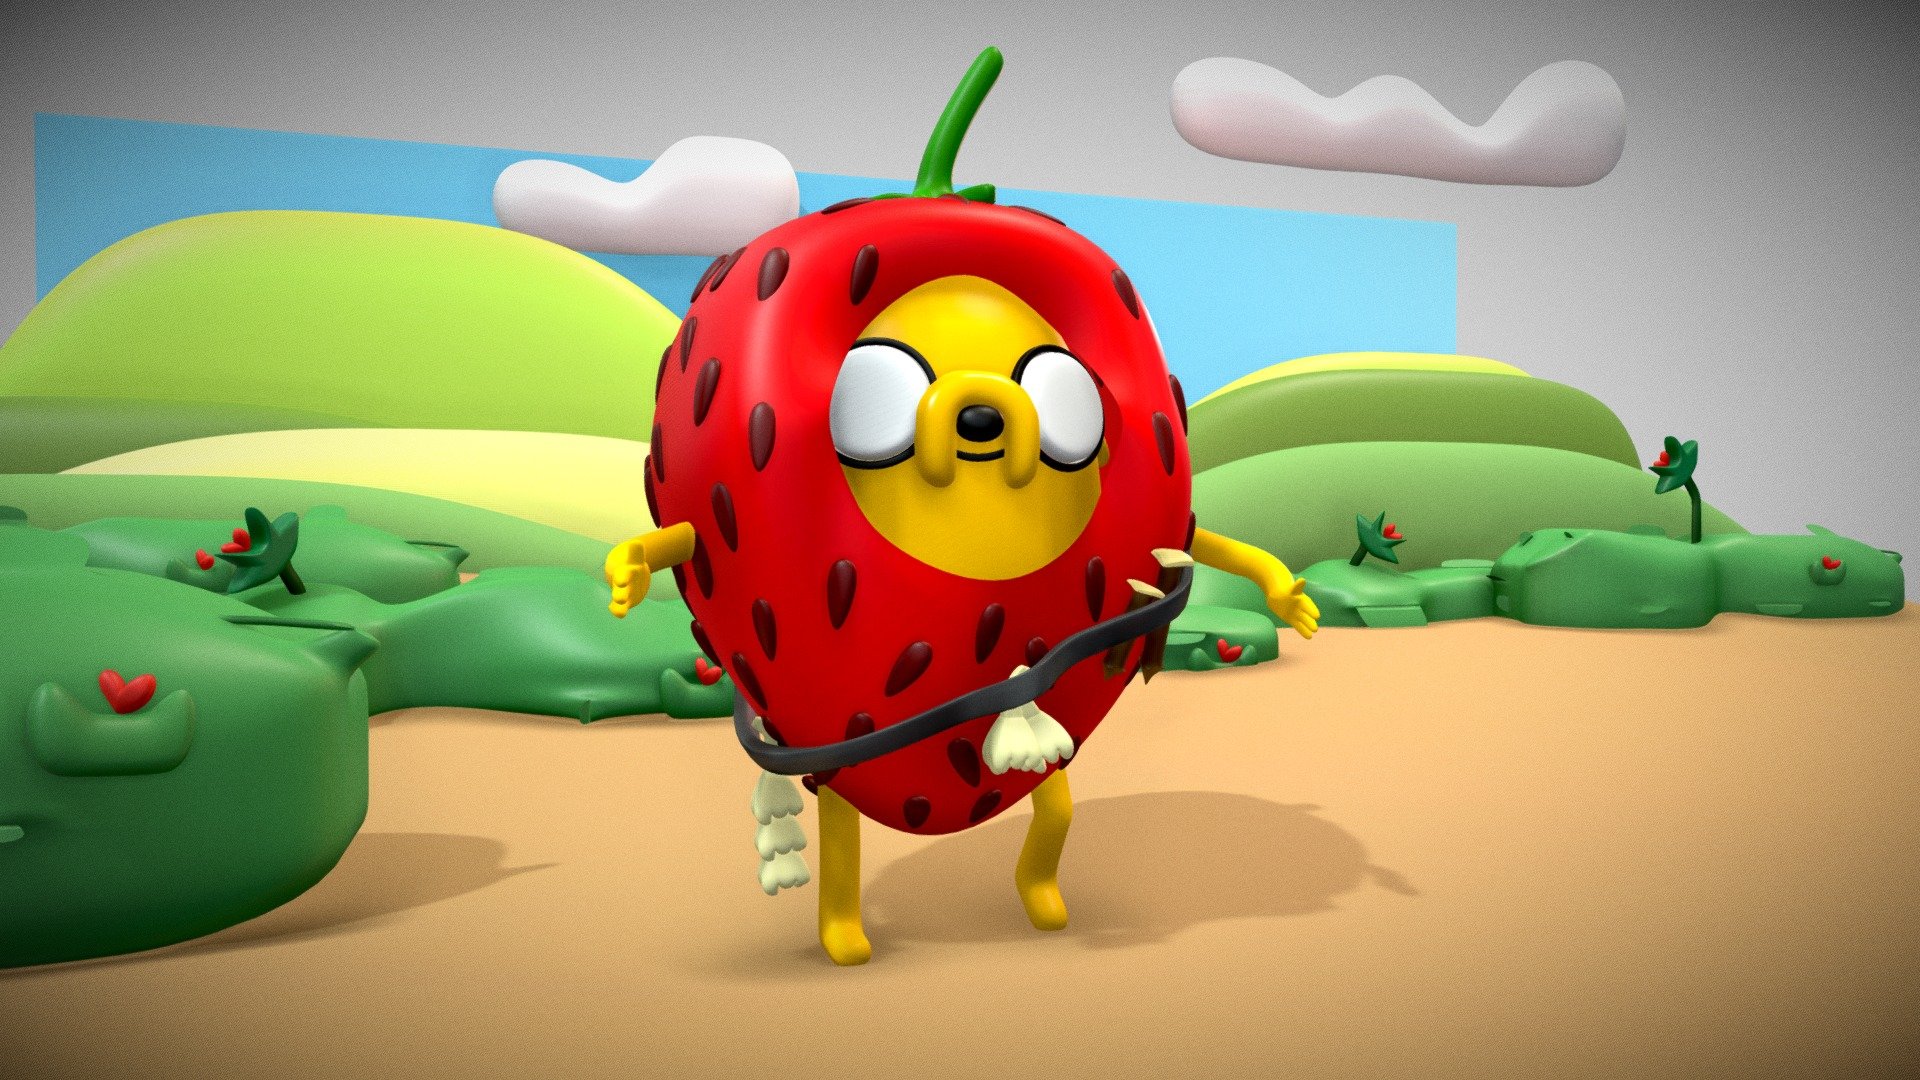 Jake the dog from adventure time, character with Rig, the strawberry costume can be removed and only jake can be left for other uses or animations (he has ears)

Renders made in Blender Cycles:


 - Jake The Dog (Strawberry) - Buy Royalty Free 3D model by HugoCabreth (@HugoEspino) 3d model